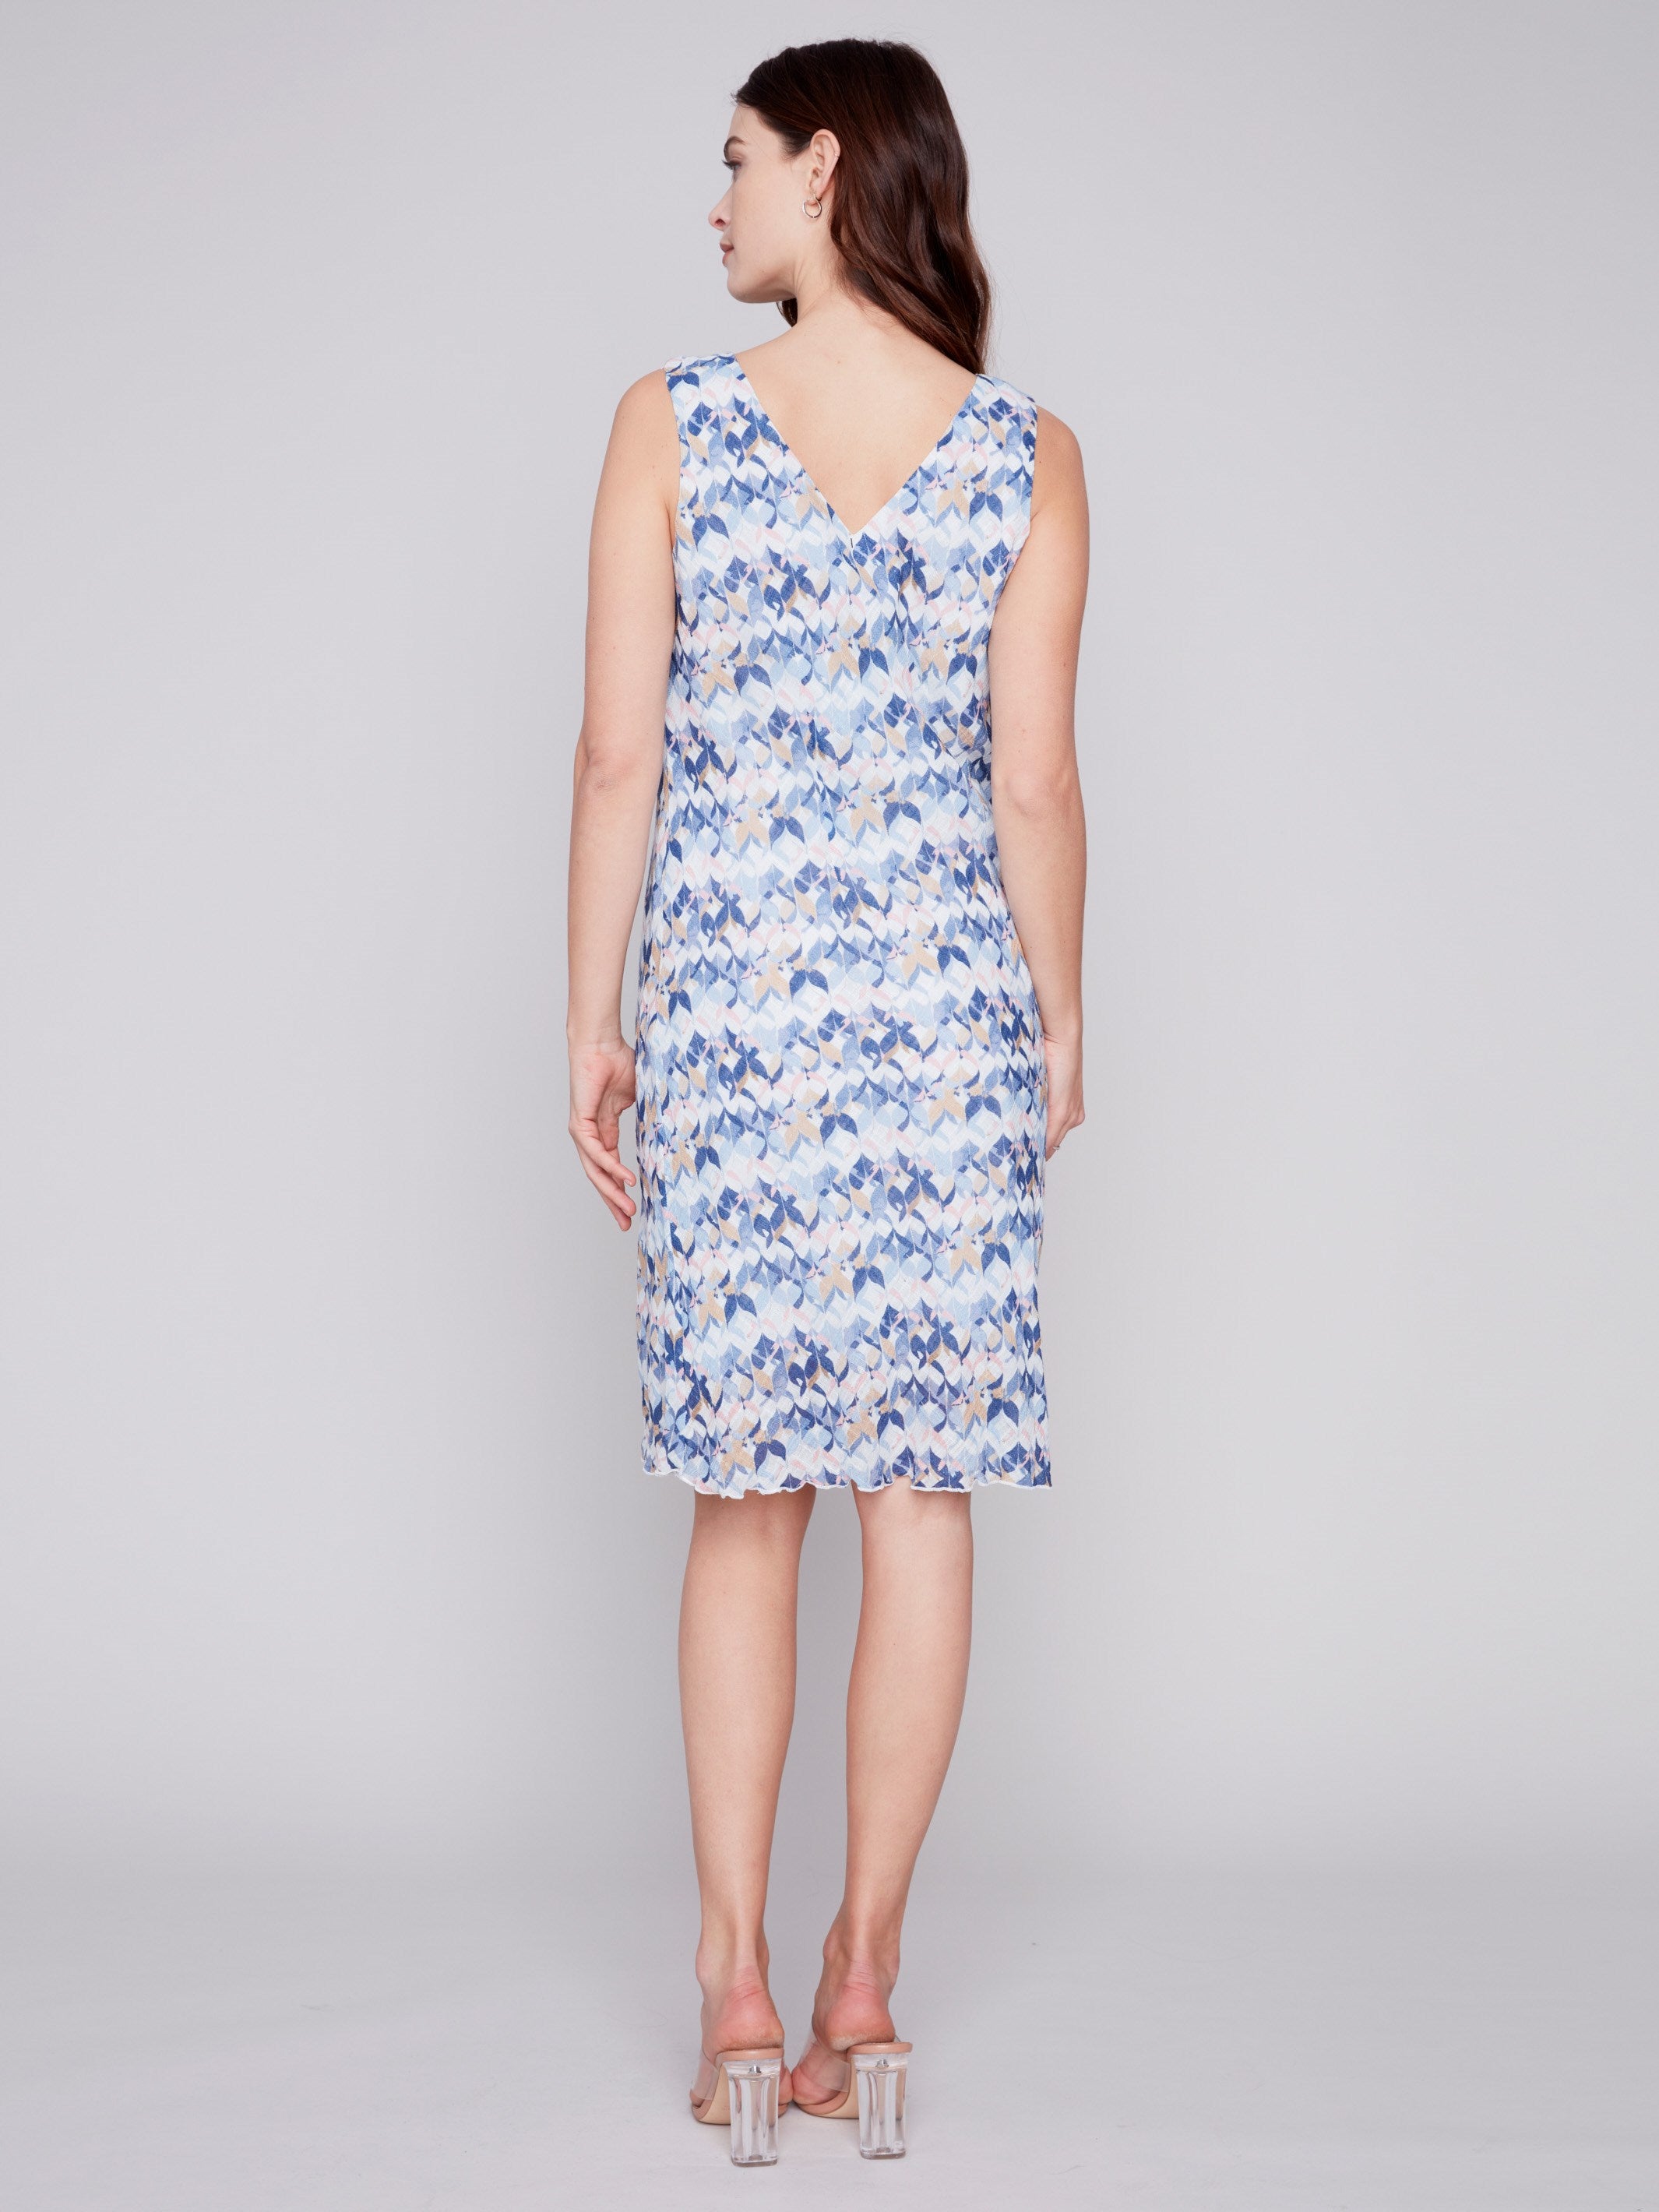 Sleeveless Printed Cotton Gauze Dress - Abstract - Charlie B Collection Canada - Image 4